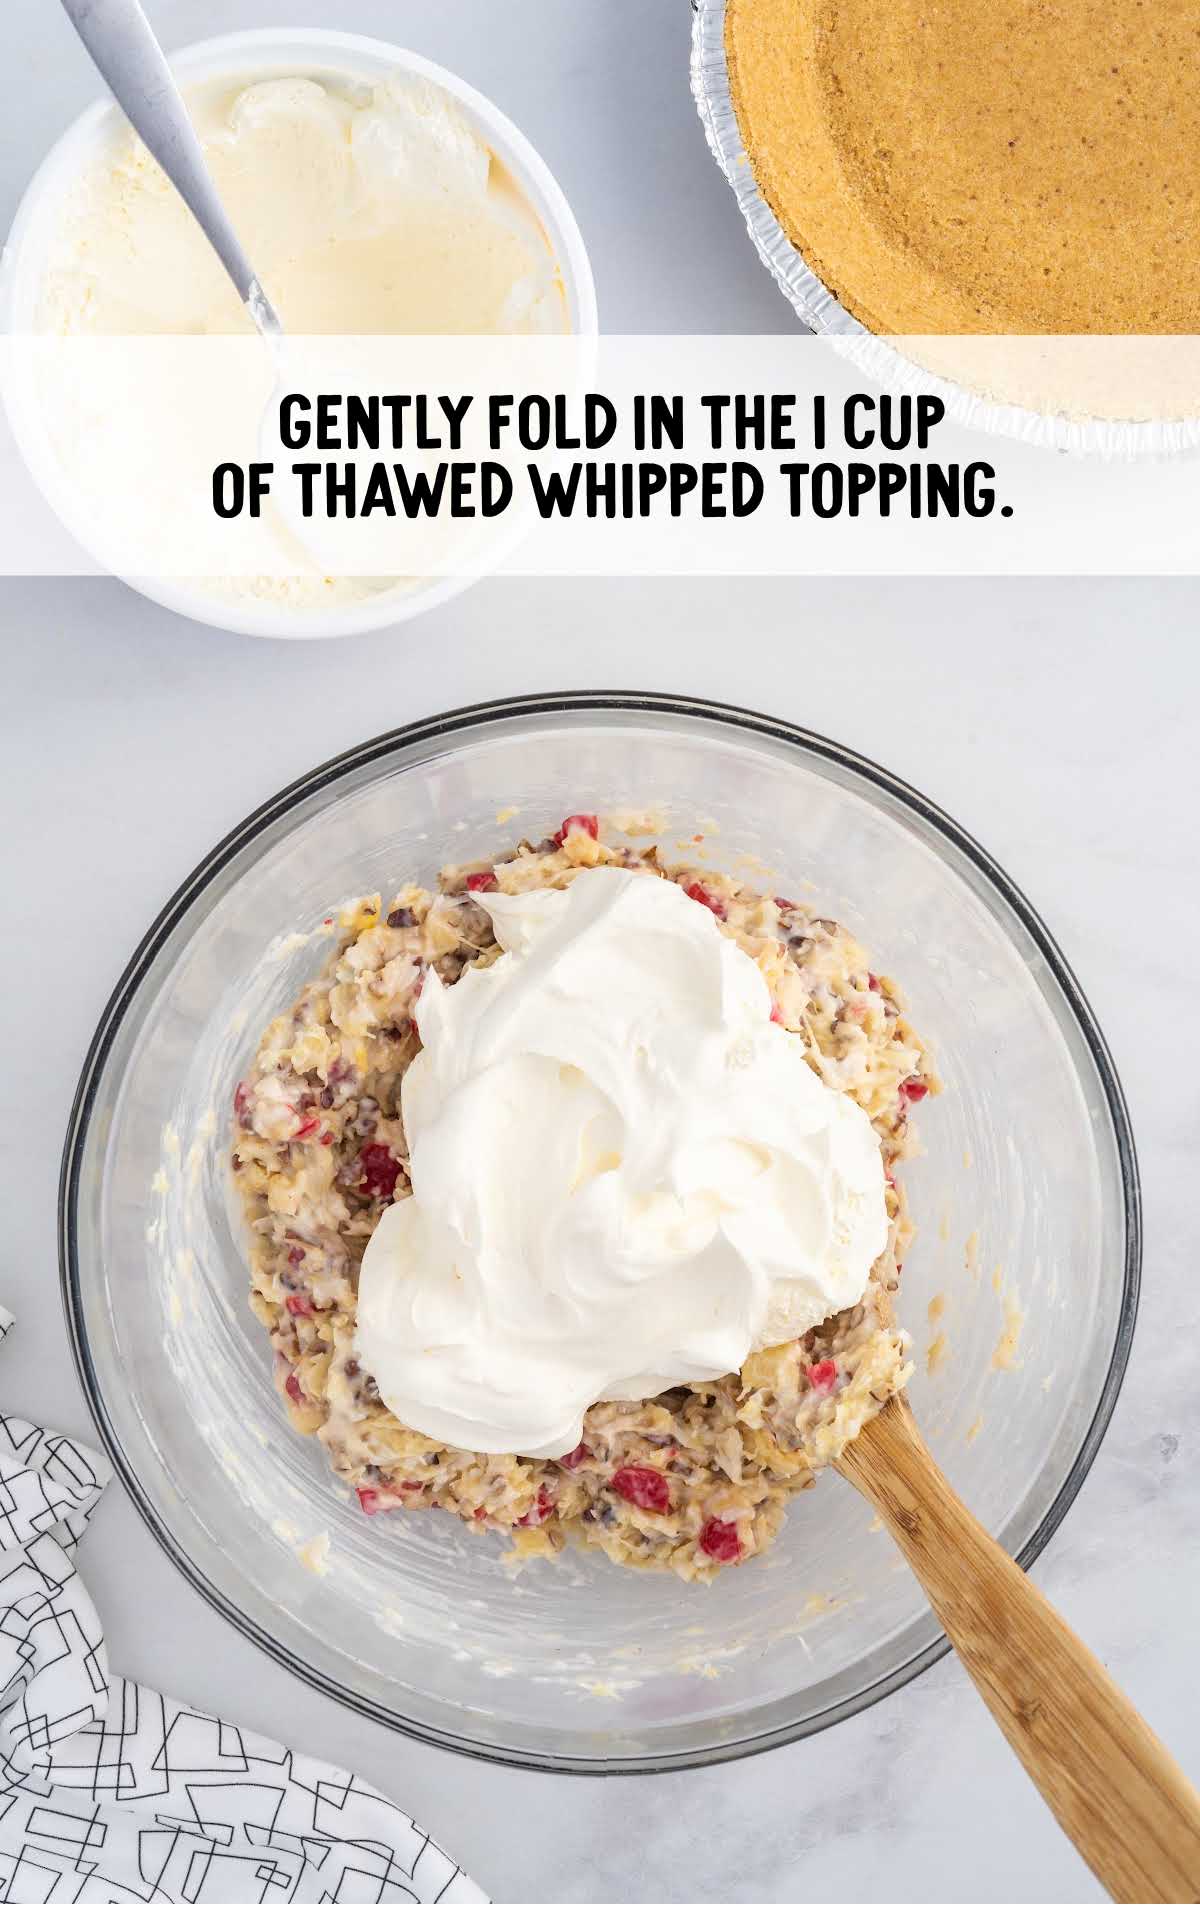 whipped topping added to the coconut flakes mixture and folded in a bowl